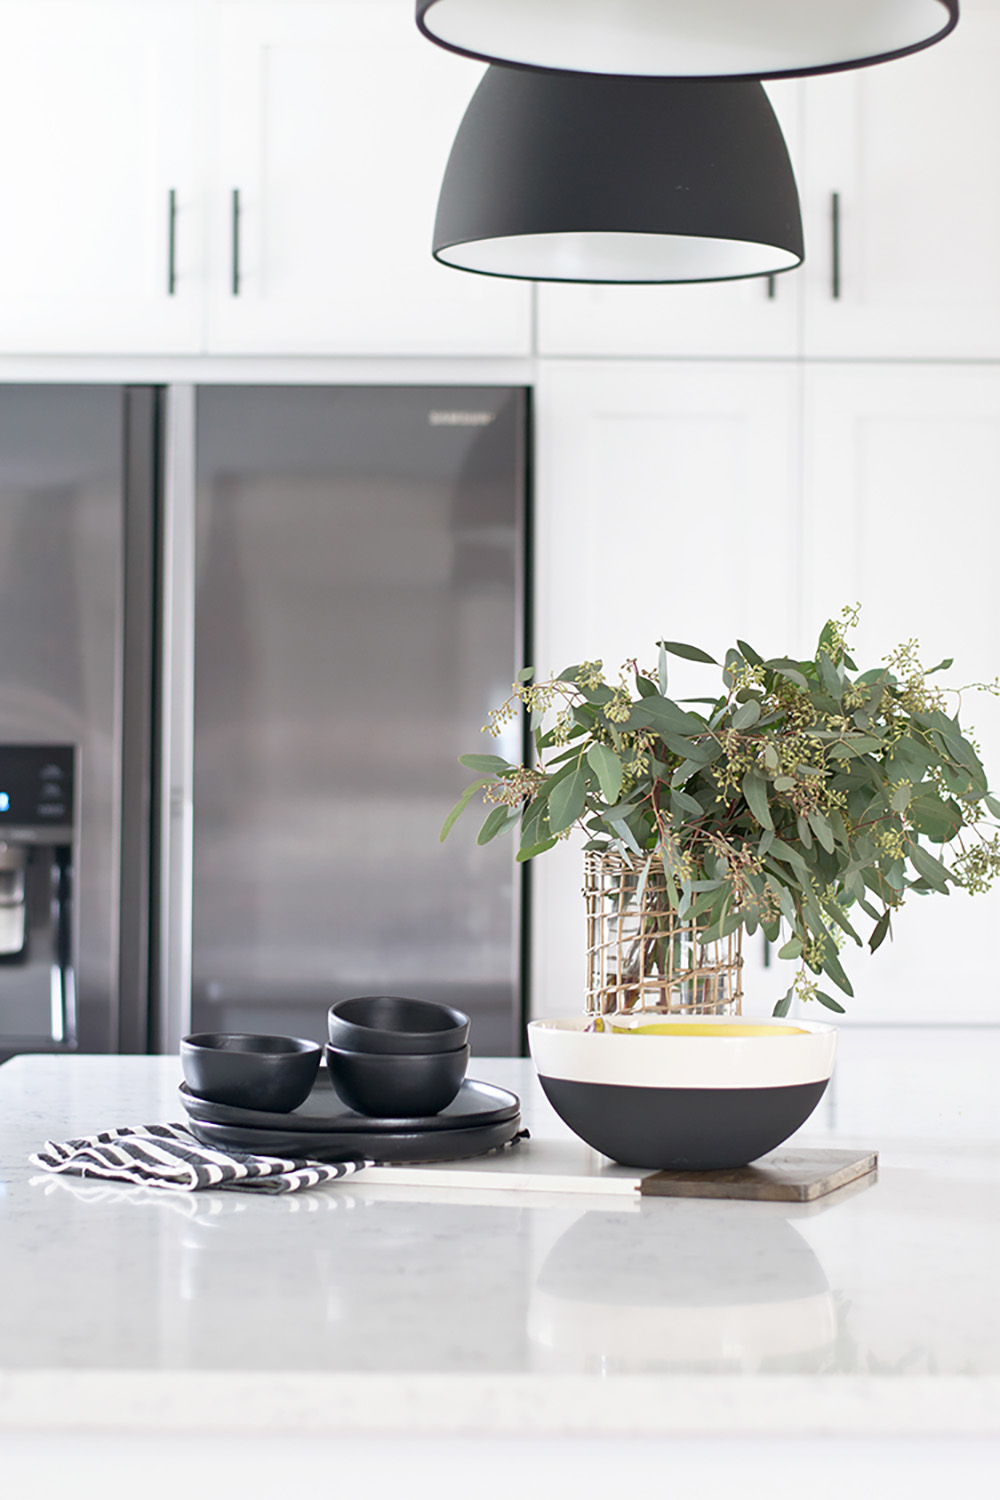 A white quartz countertop decorated with black dishes and greenery.